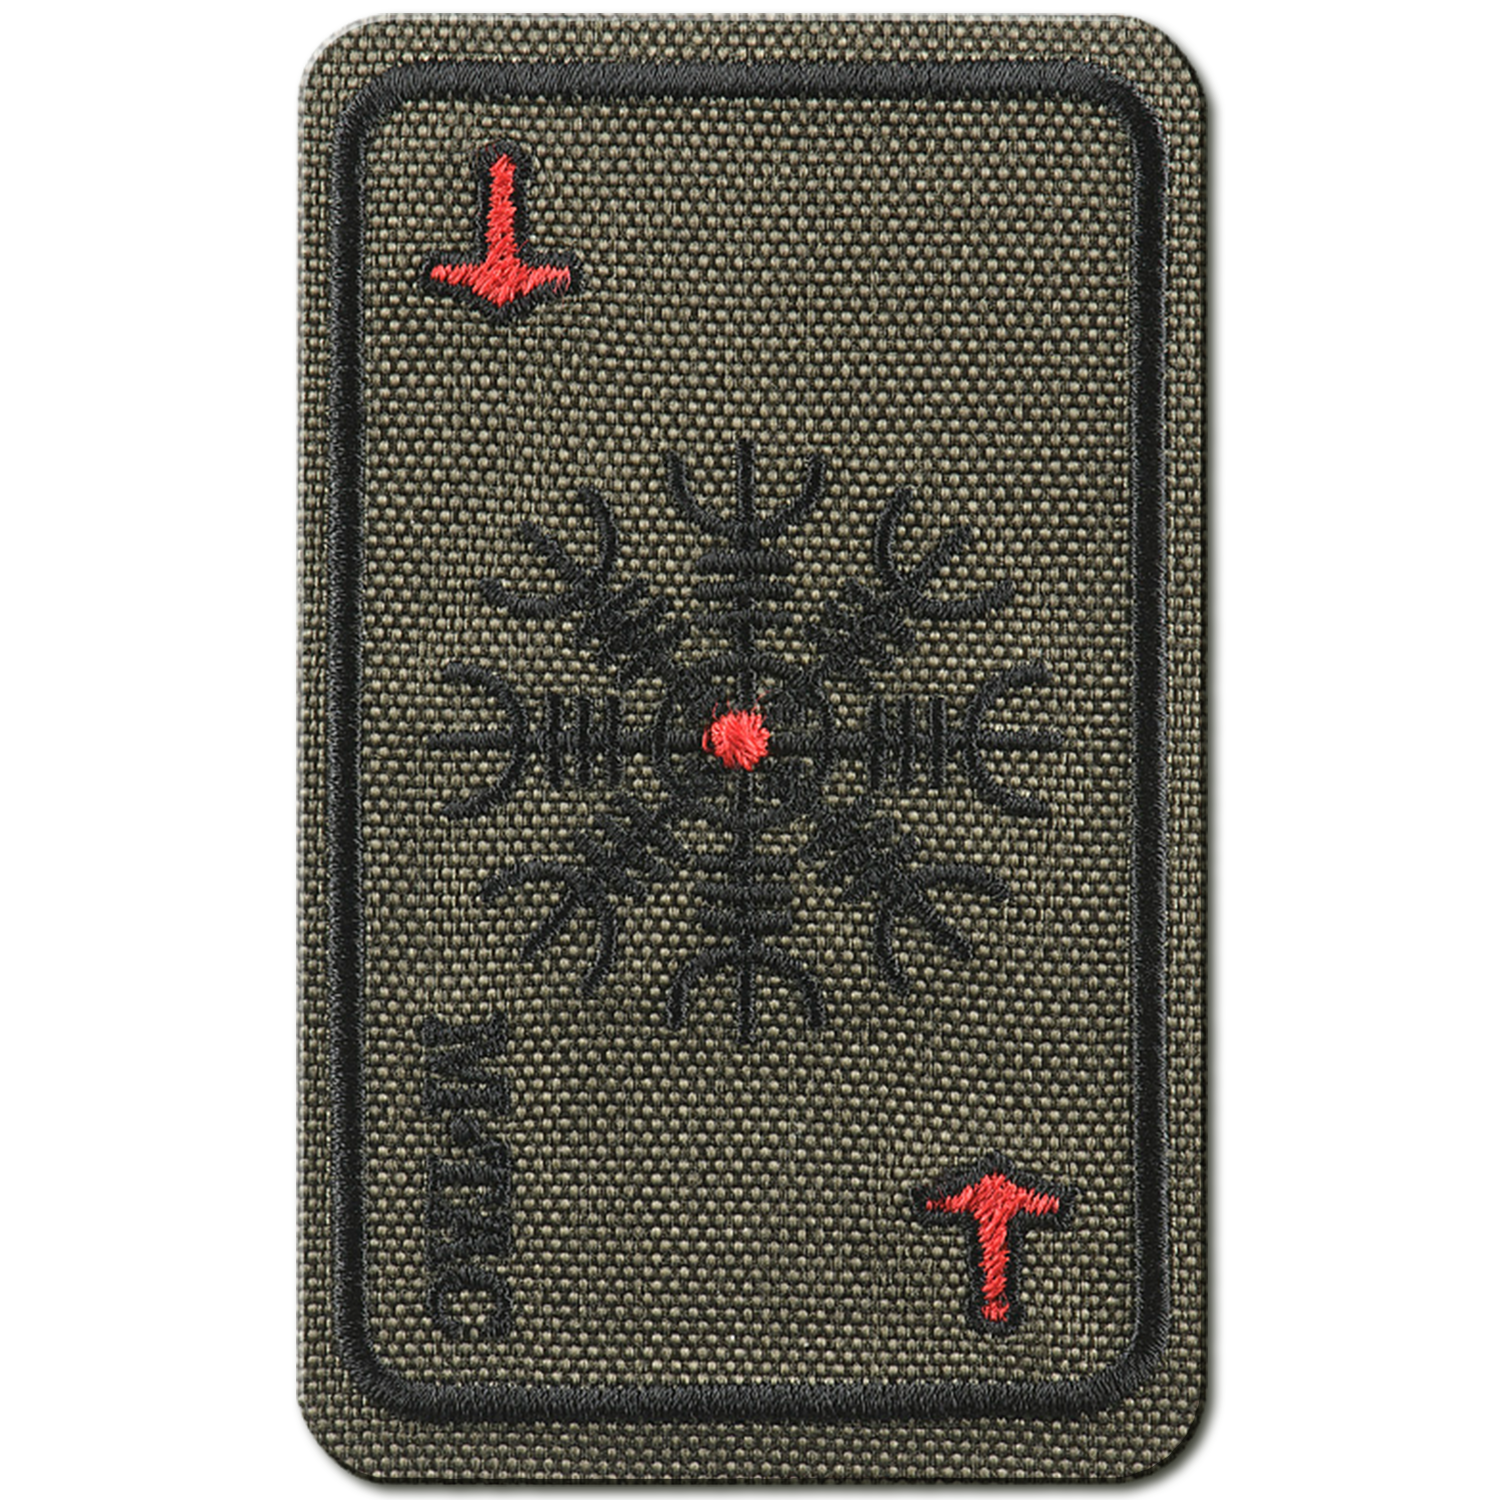 M-Tac Embroidered Patch Horror Helmet Death Card